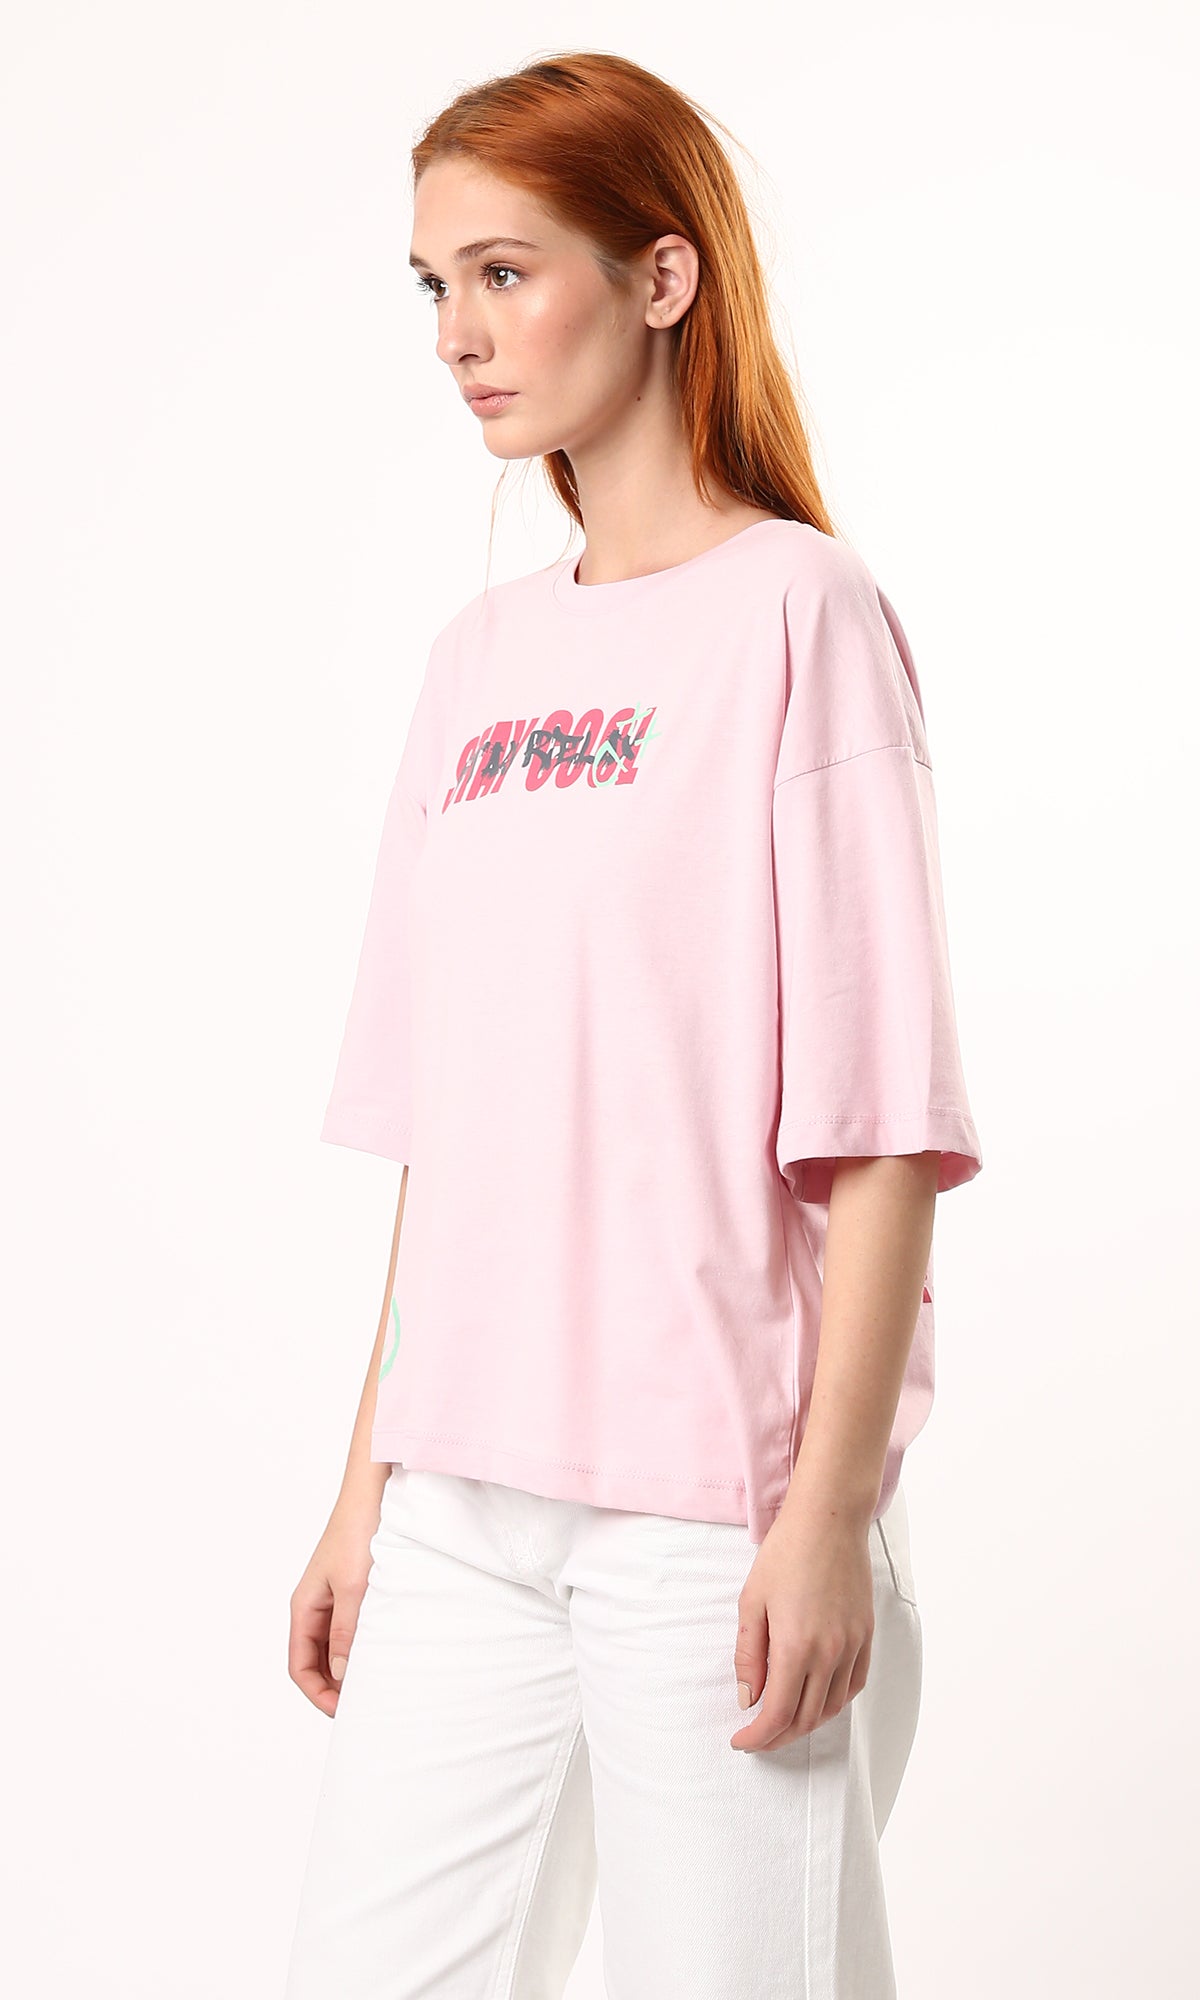 O179807 Printed "Stay Cool" Slip On Cotton Rose Tee